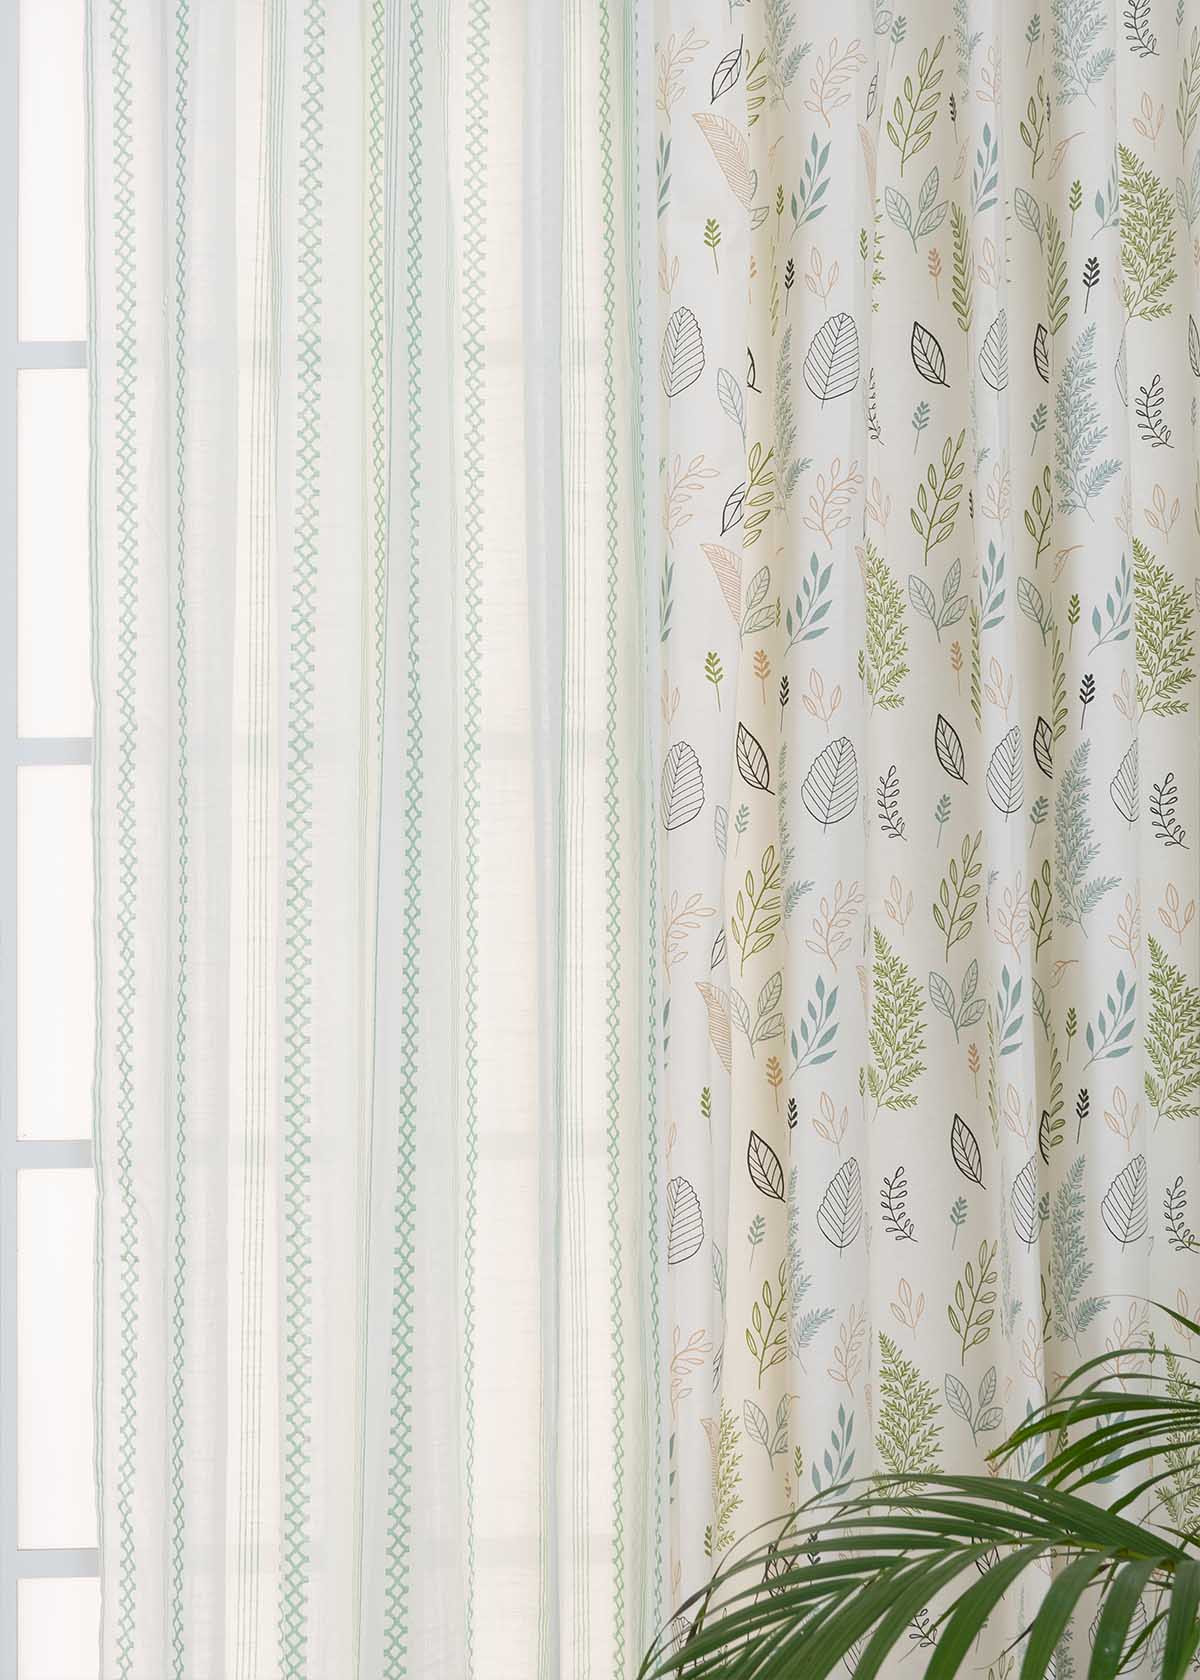 Rustling Leaves, Picket Fence Sage Green Sheer Set Of 4 Combo Cotton Curtain - Green